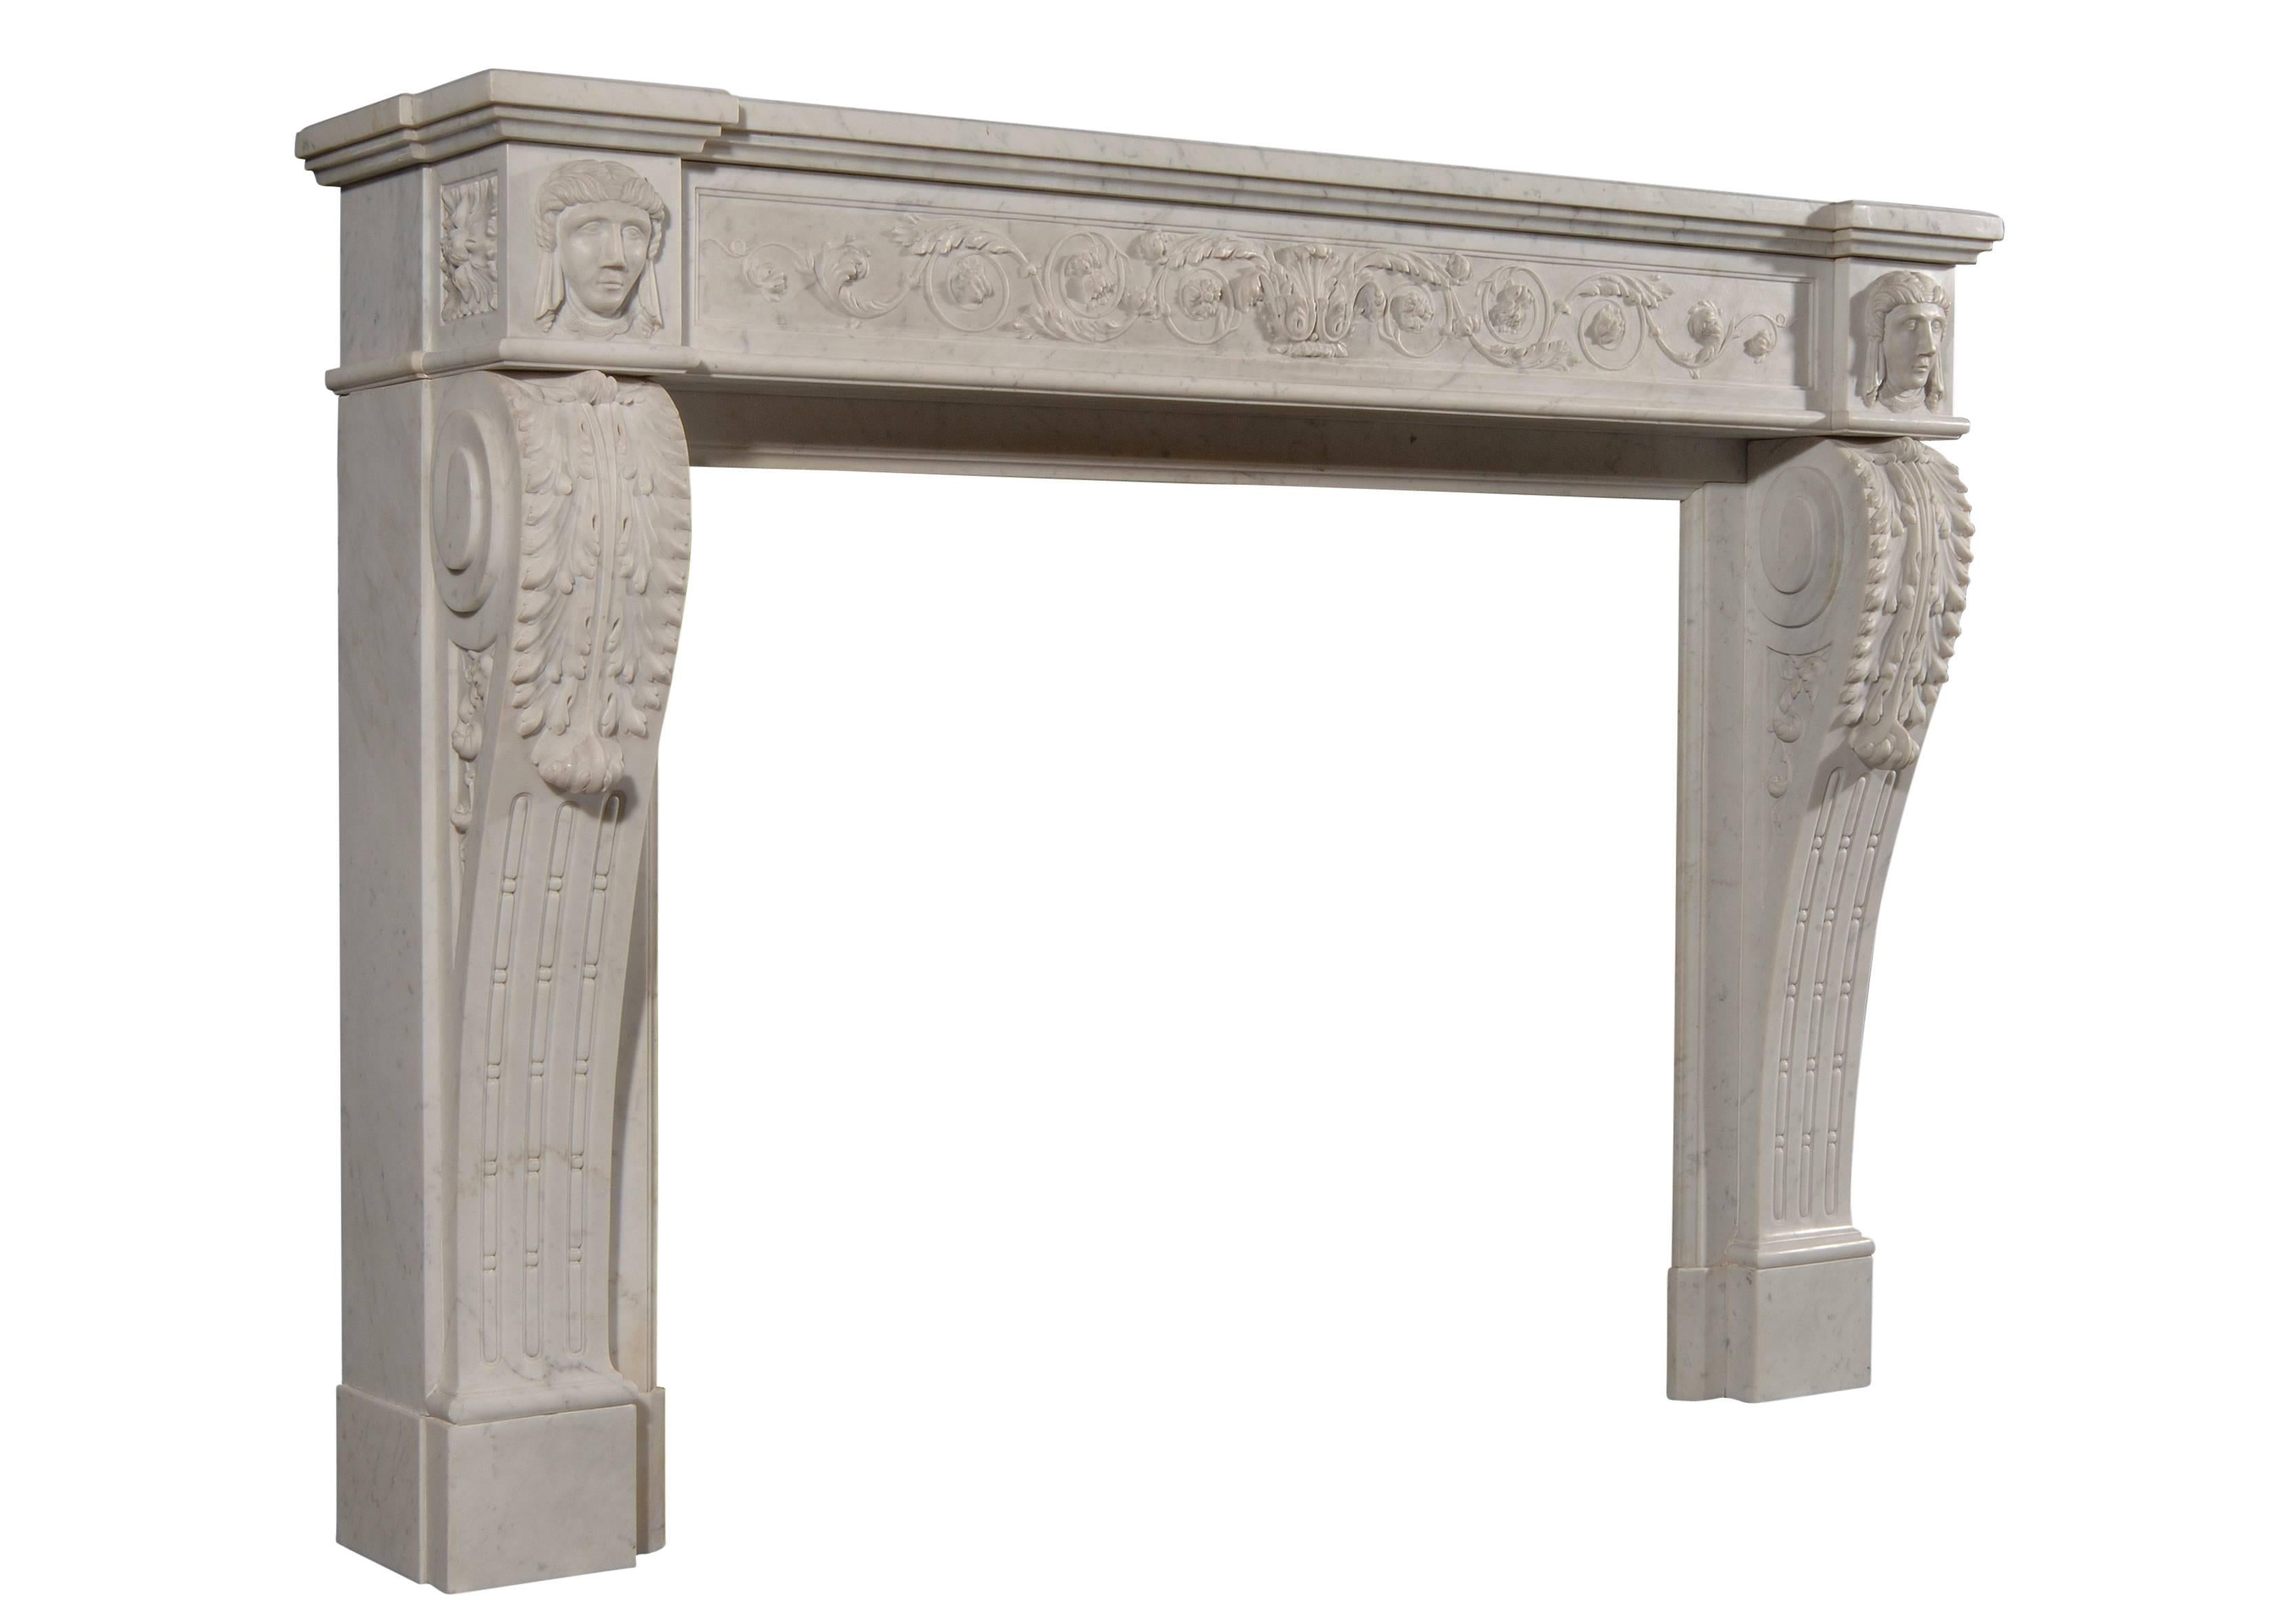 An unusual and nicely carved 19th century (circa 1840) French XVI style Carrara marble fireplace. The frieze with scrolled foliage. The shaped jambs with acanthus leaves, surmounted by side blockings with carved female faces and square paterae to